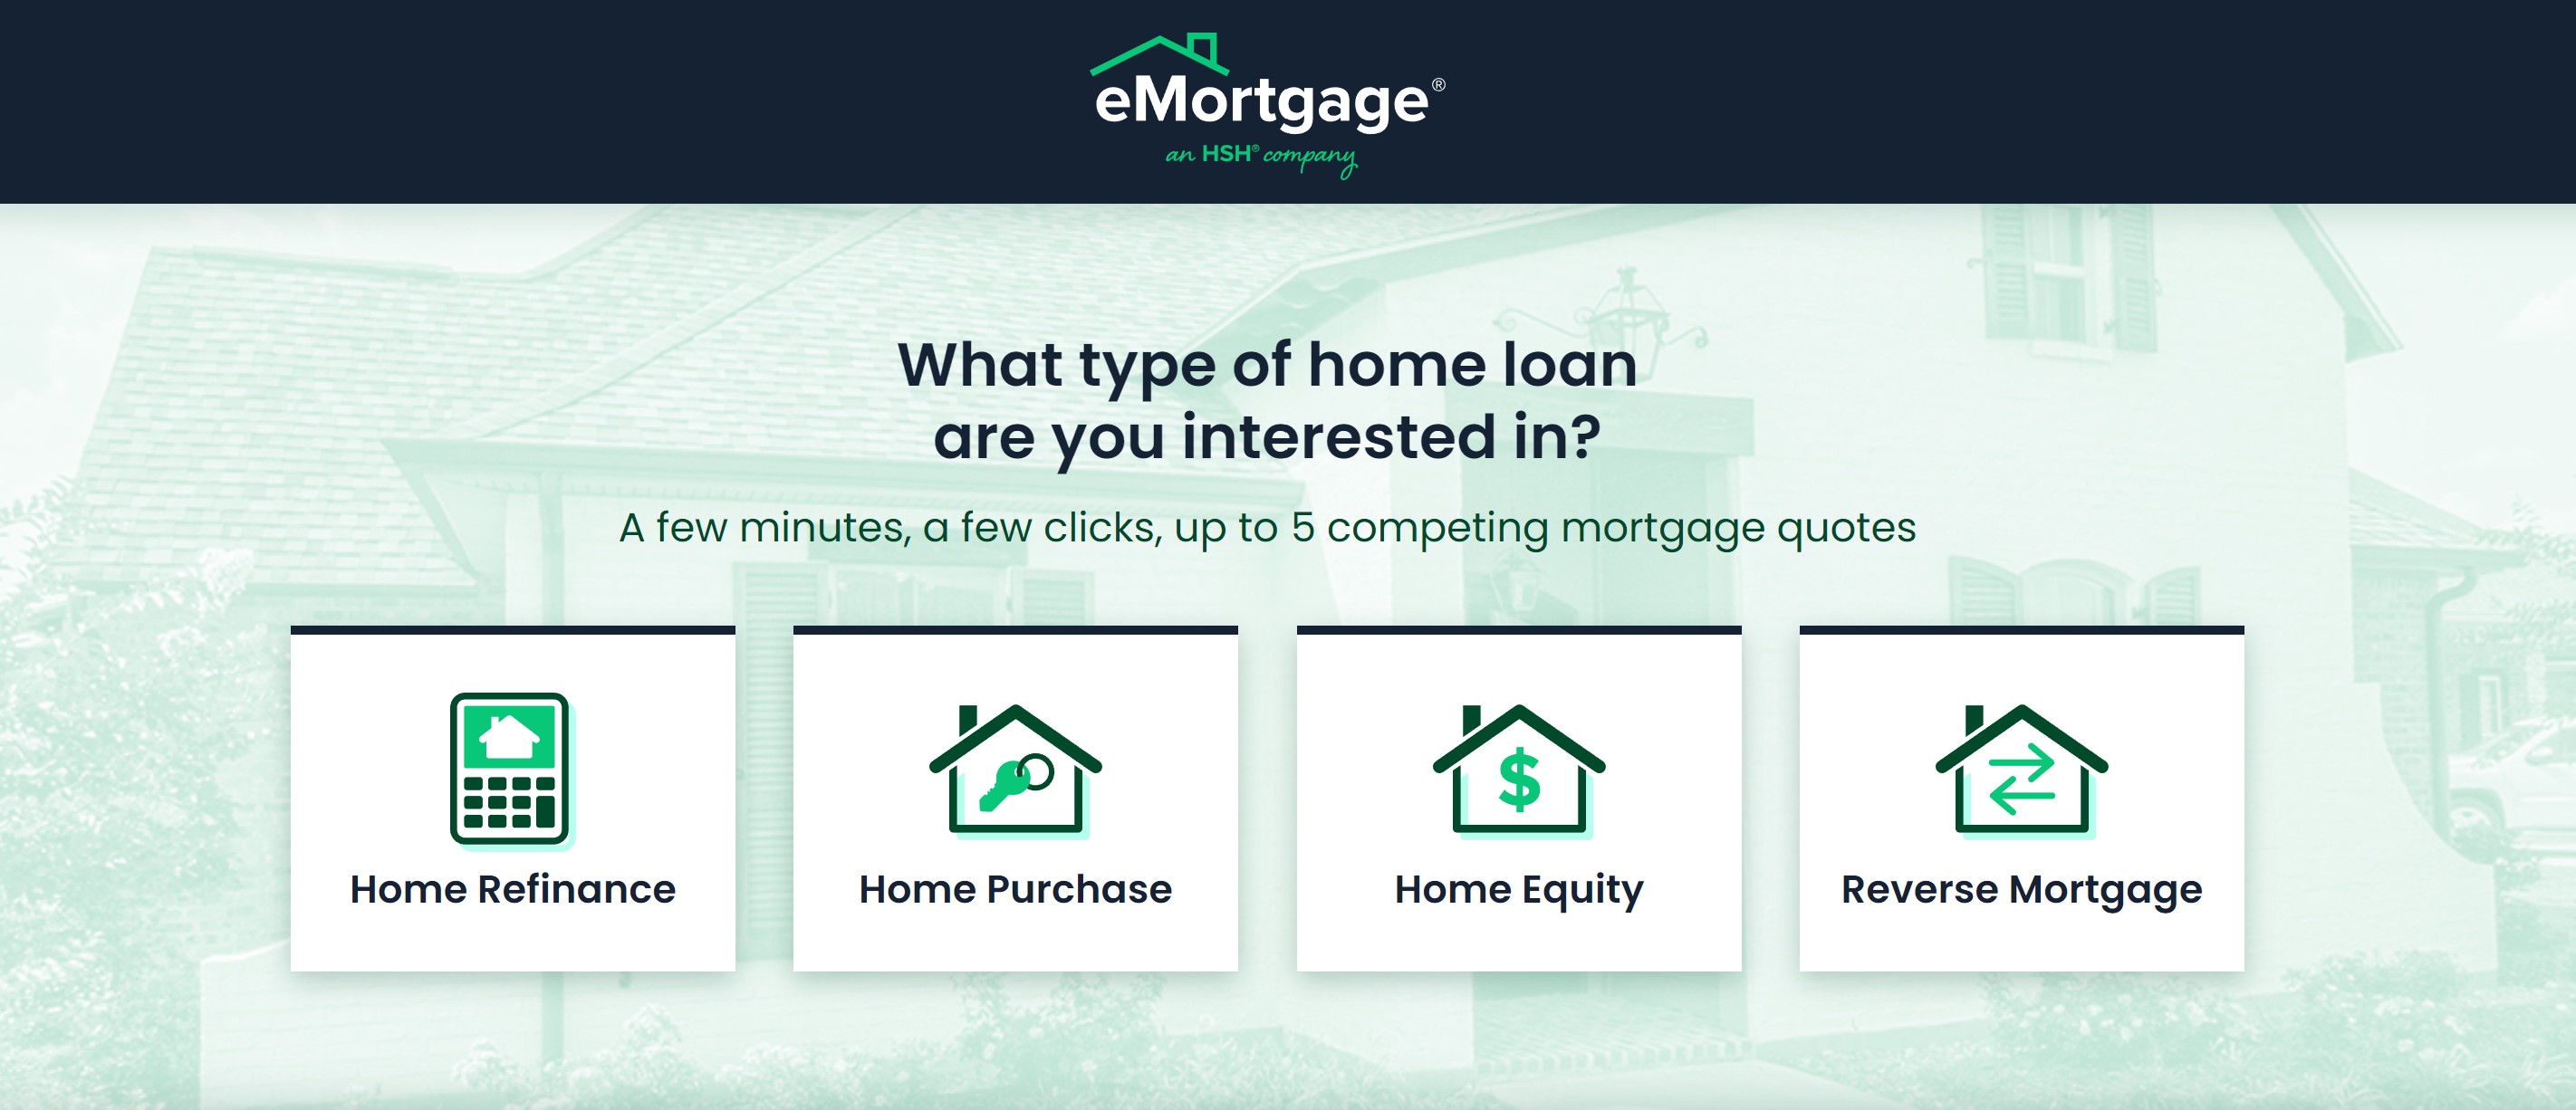 eMortgage cover